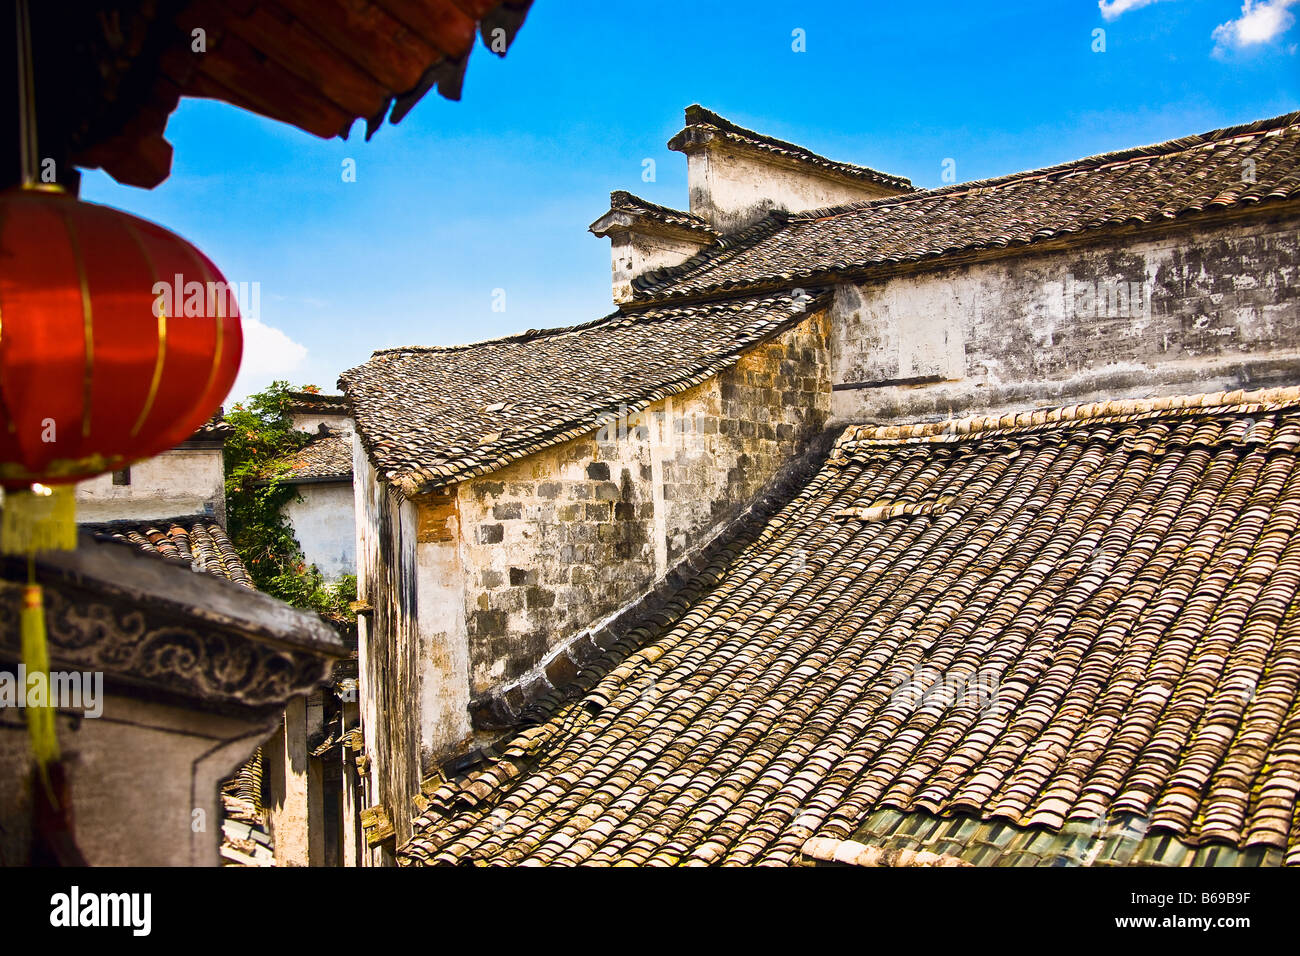 High angle view of a rooftop, Xidi, Anhui Province, China Stock Photo